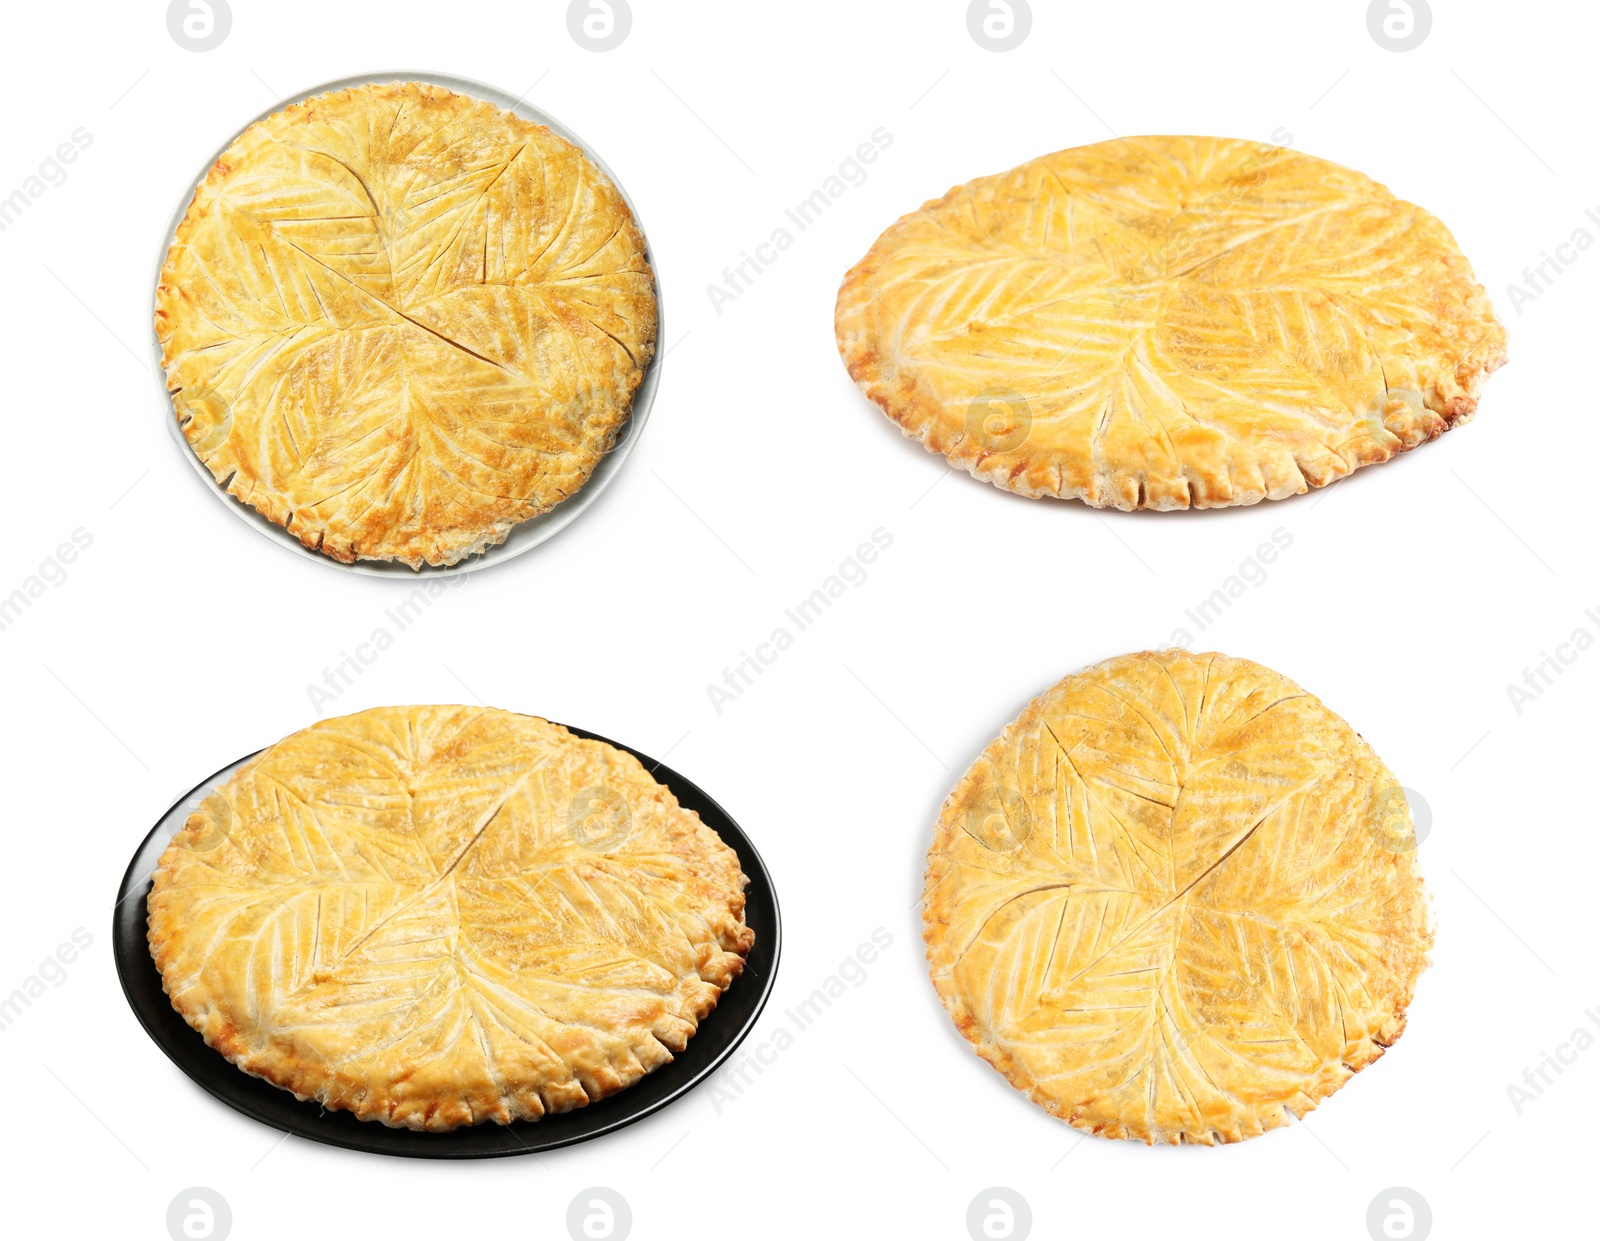 Image of Set of traditional delicious galettes des rois on white background